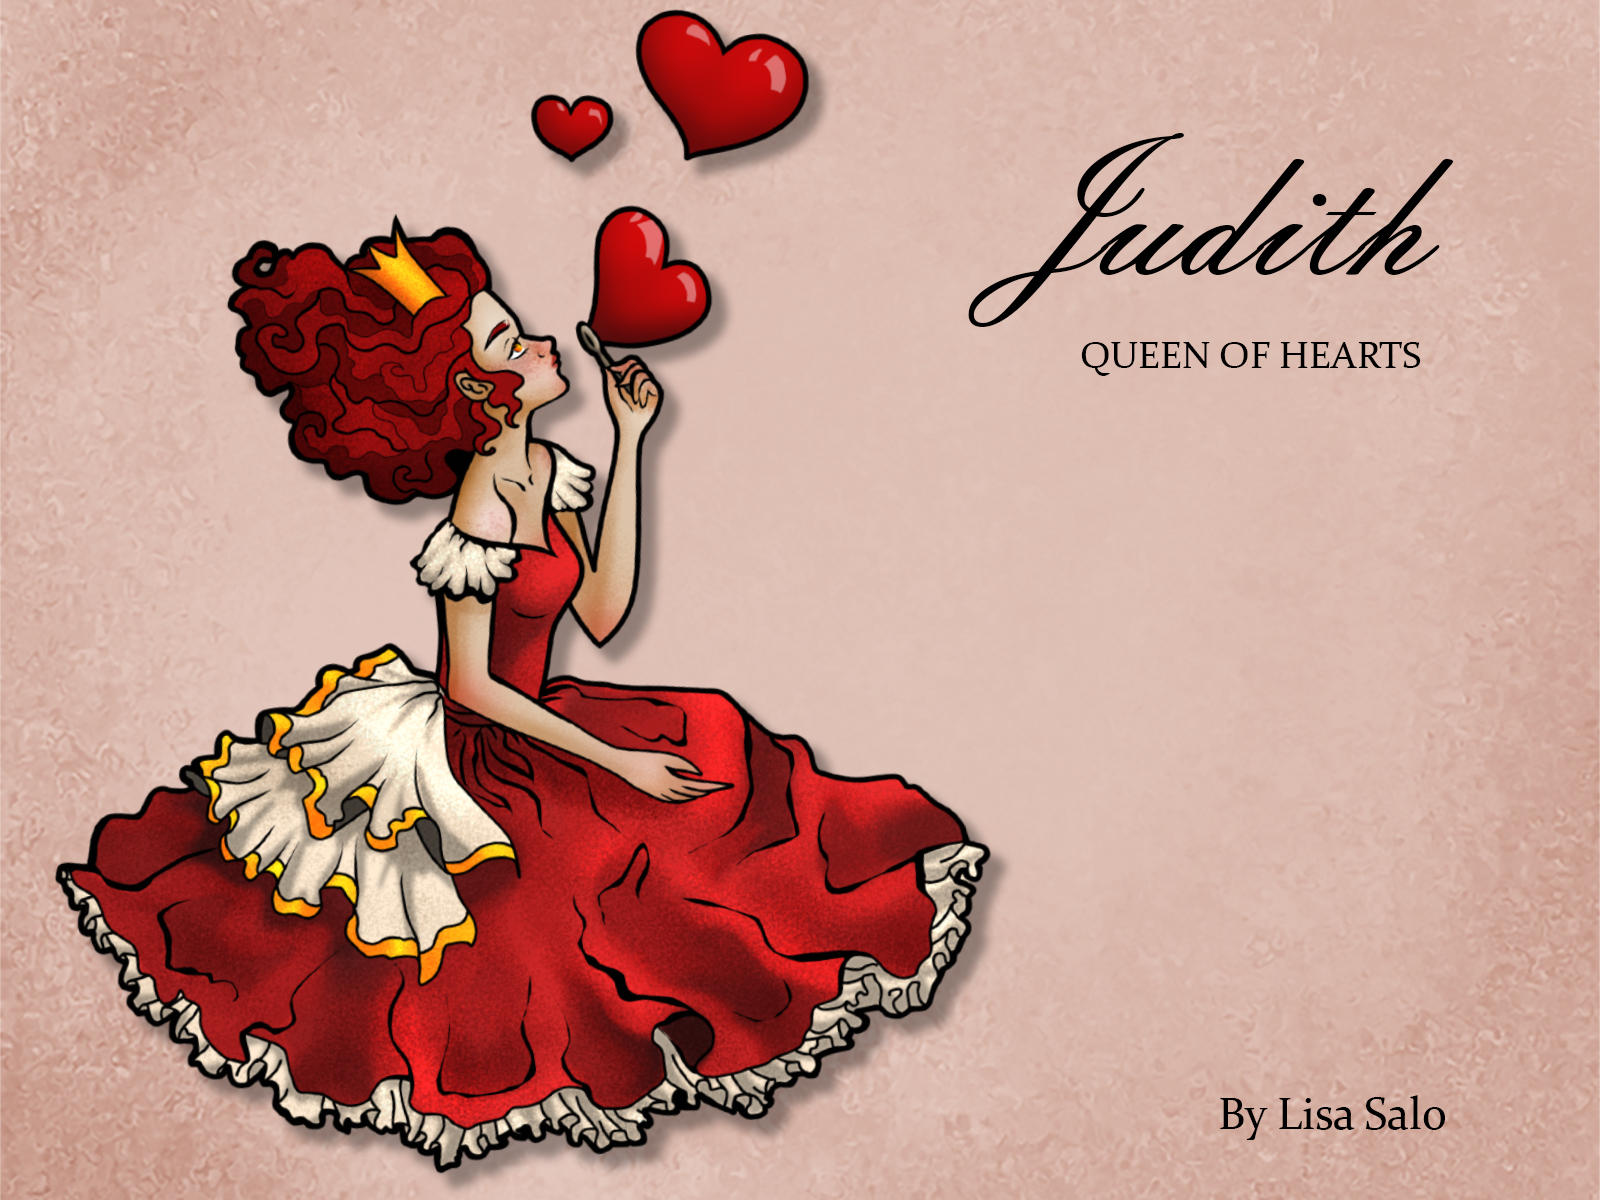 Judith - Queen of hearts by 7L design (Lisa Salo) on Dribbble